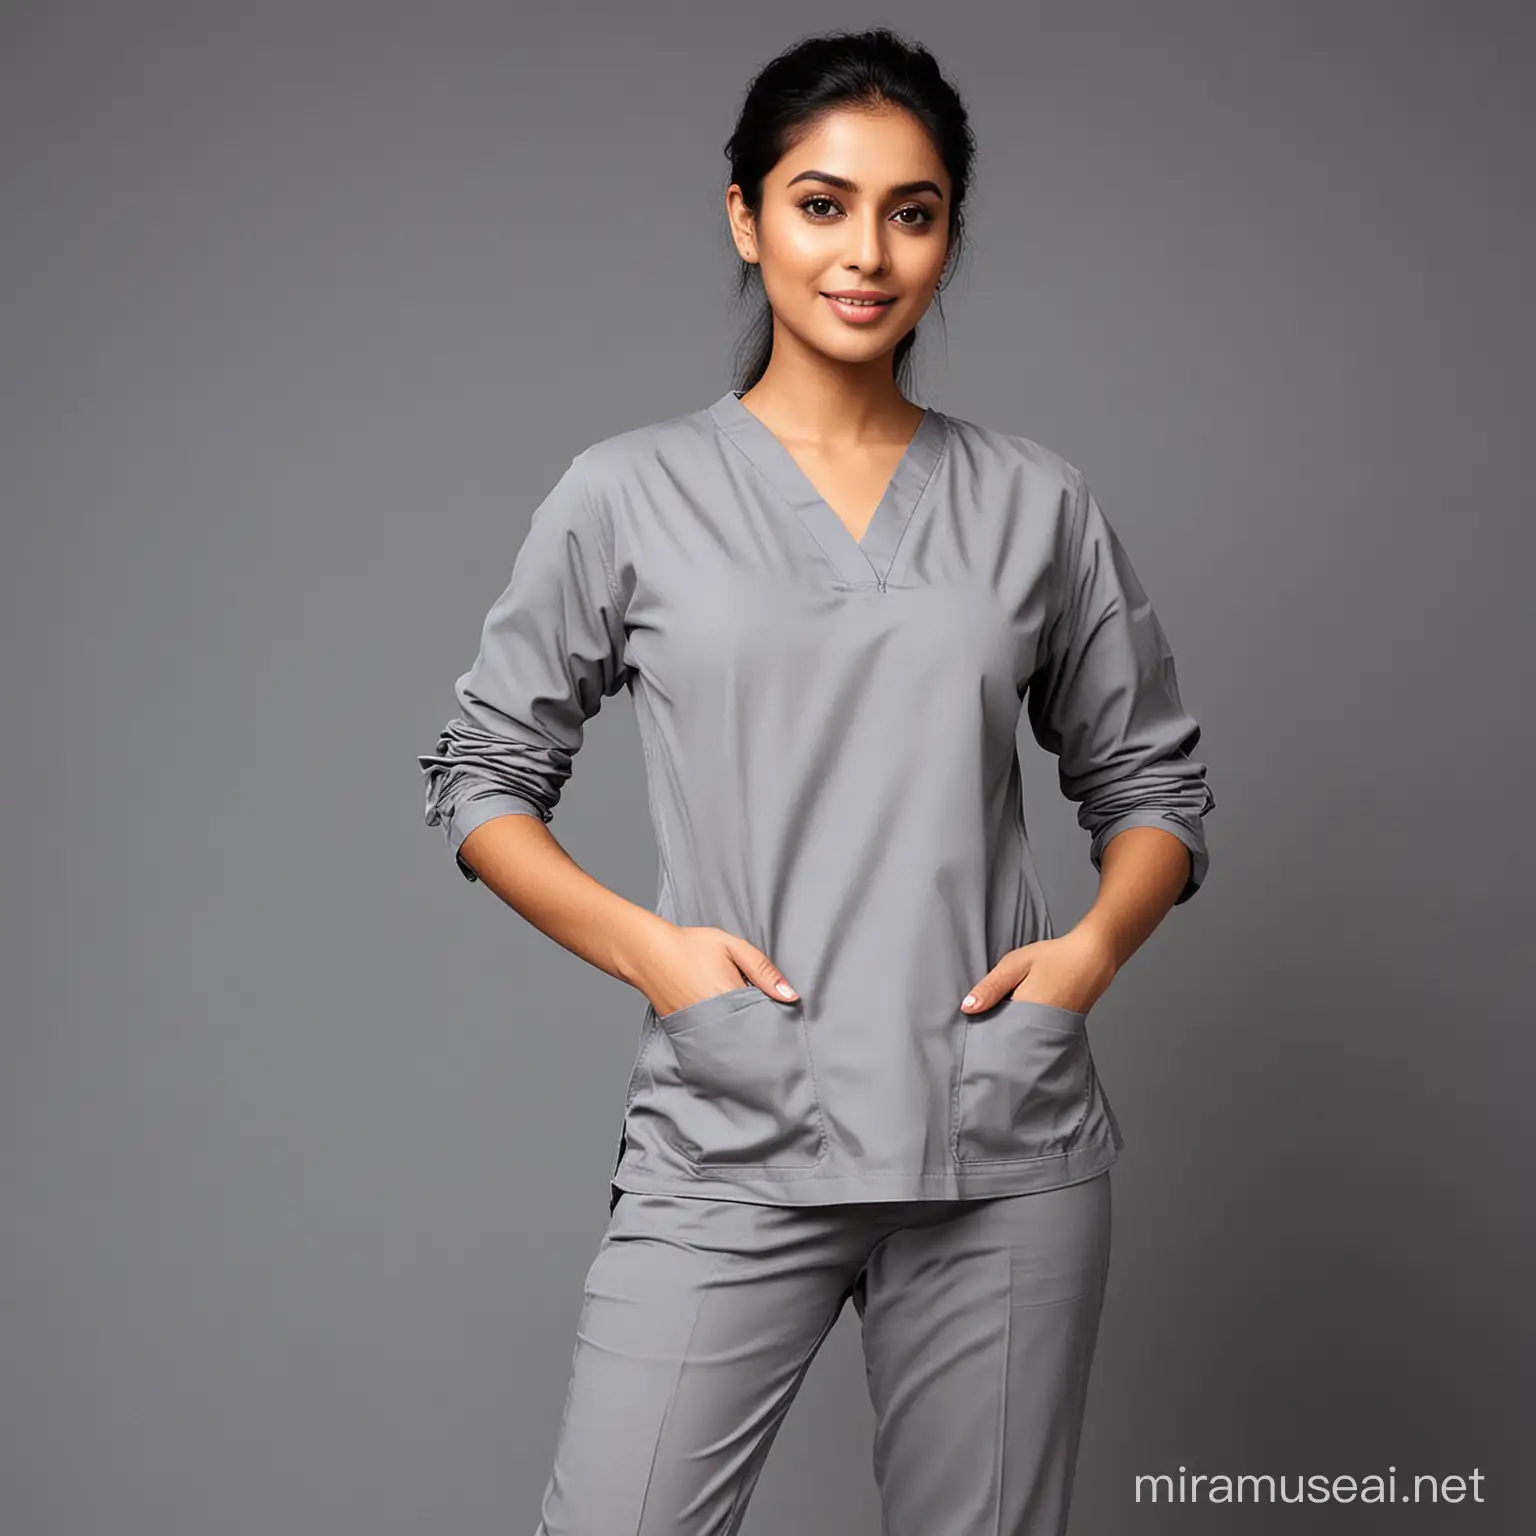 Stylish Indian Model in Doctor Scrub Suit at Clinic